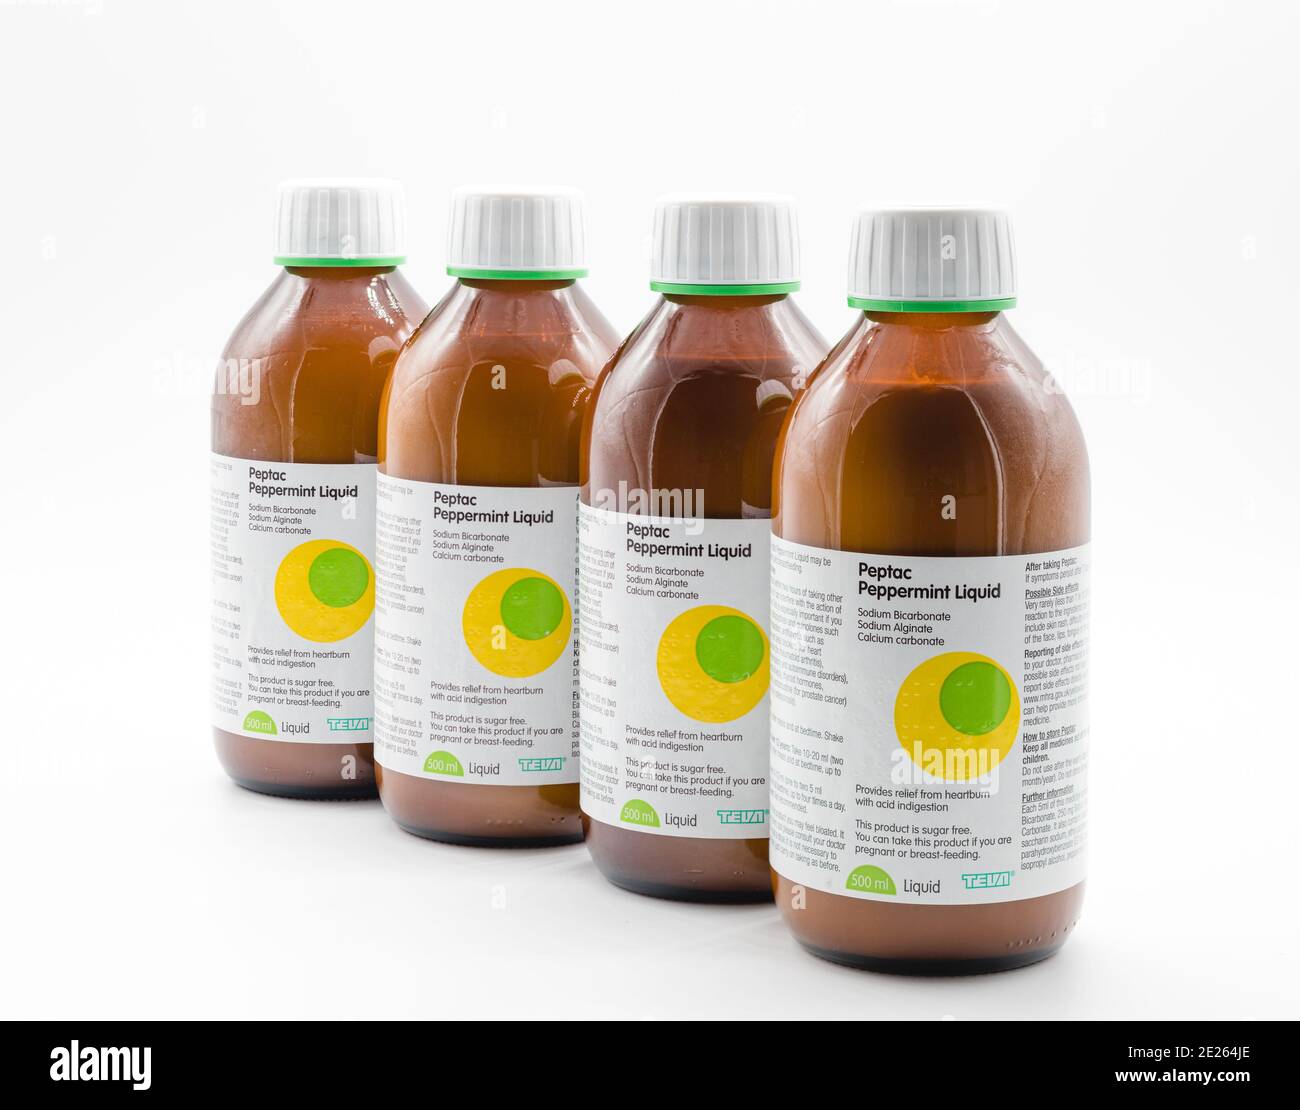 Irvine, Scotland, UK - January 09, 2021: Peptac Branded Peppermint Liquid by MA Pinewood laboratories in four 500ml recyclable glass bottle and label Stock Photo